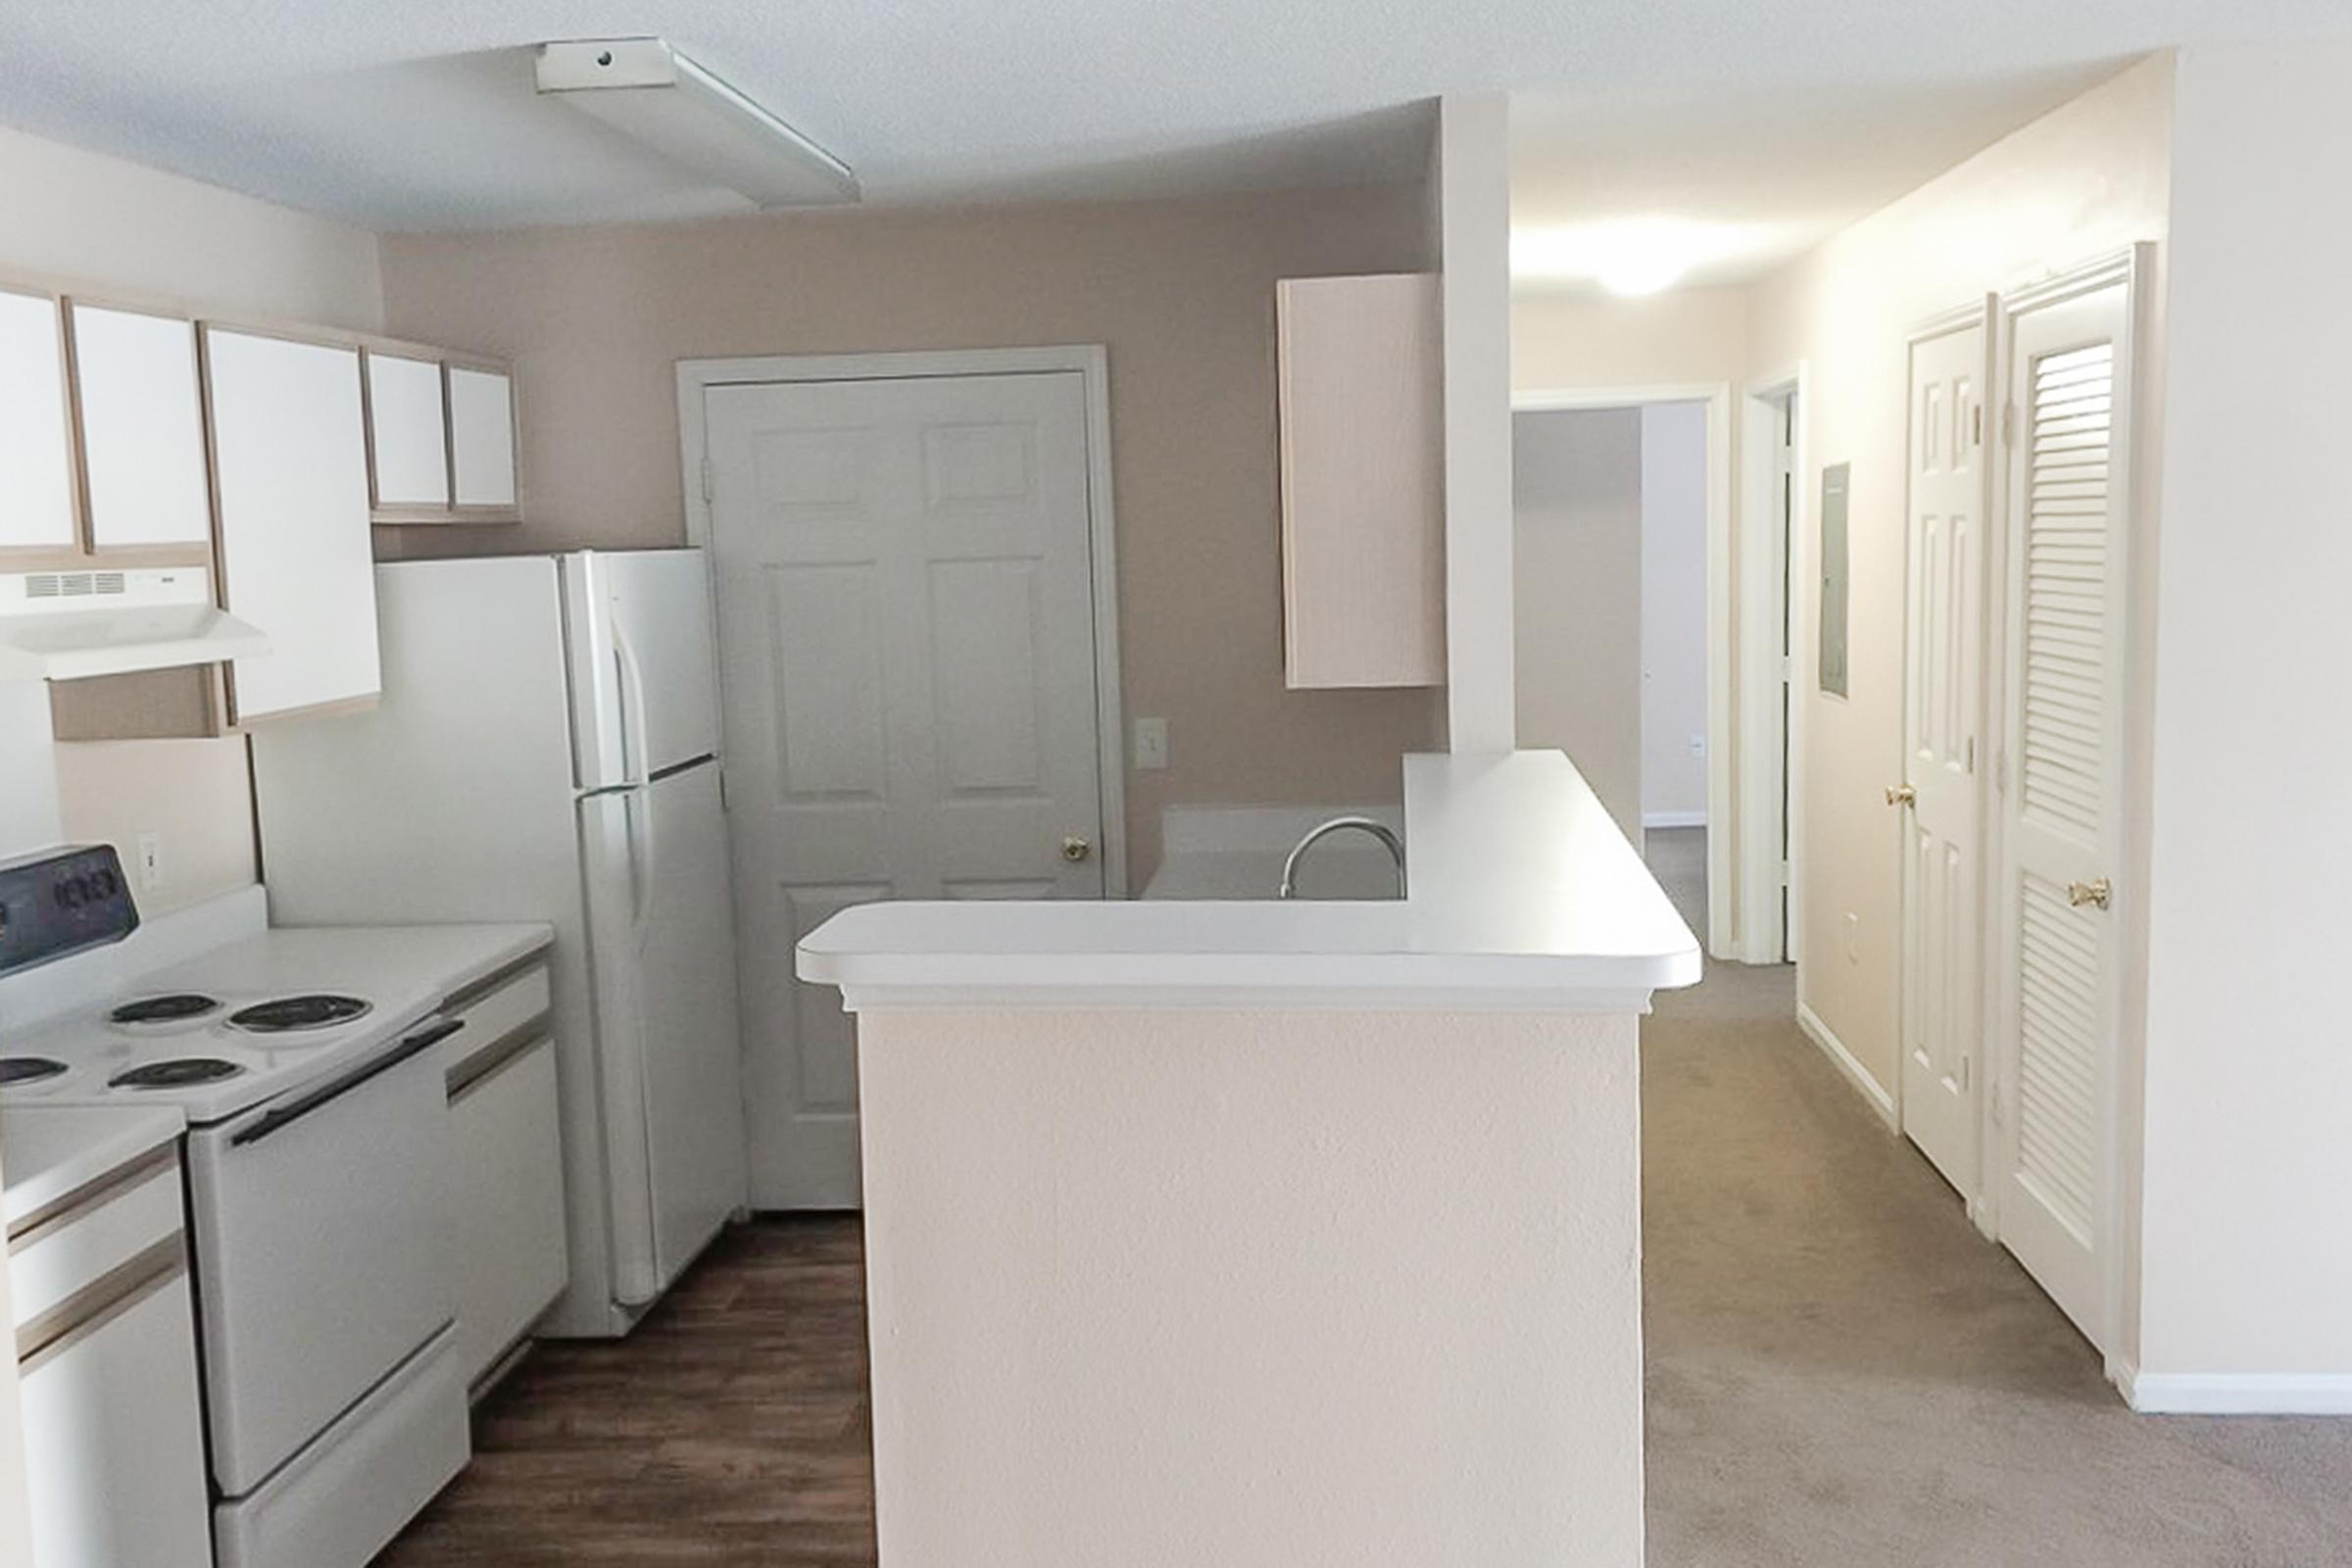 a large white refrigerator in a kitchen